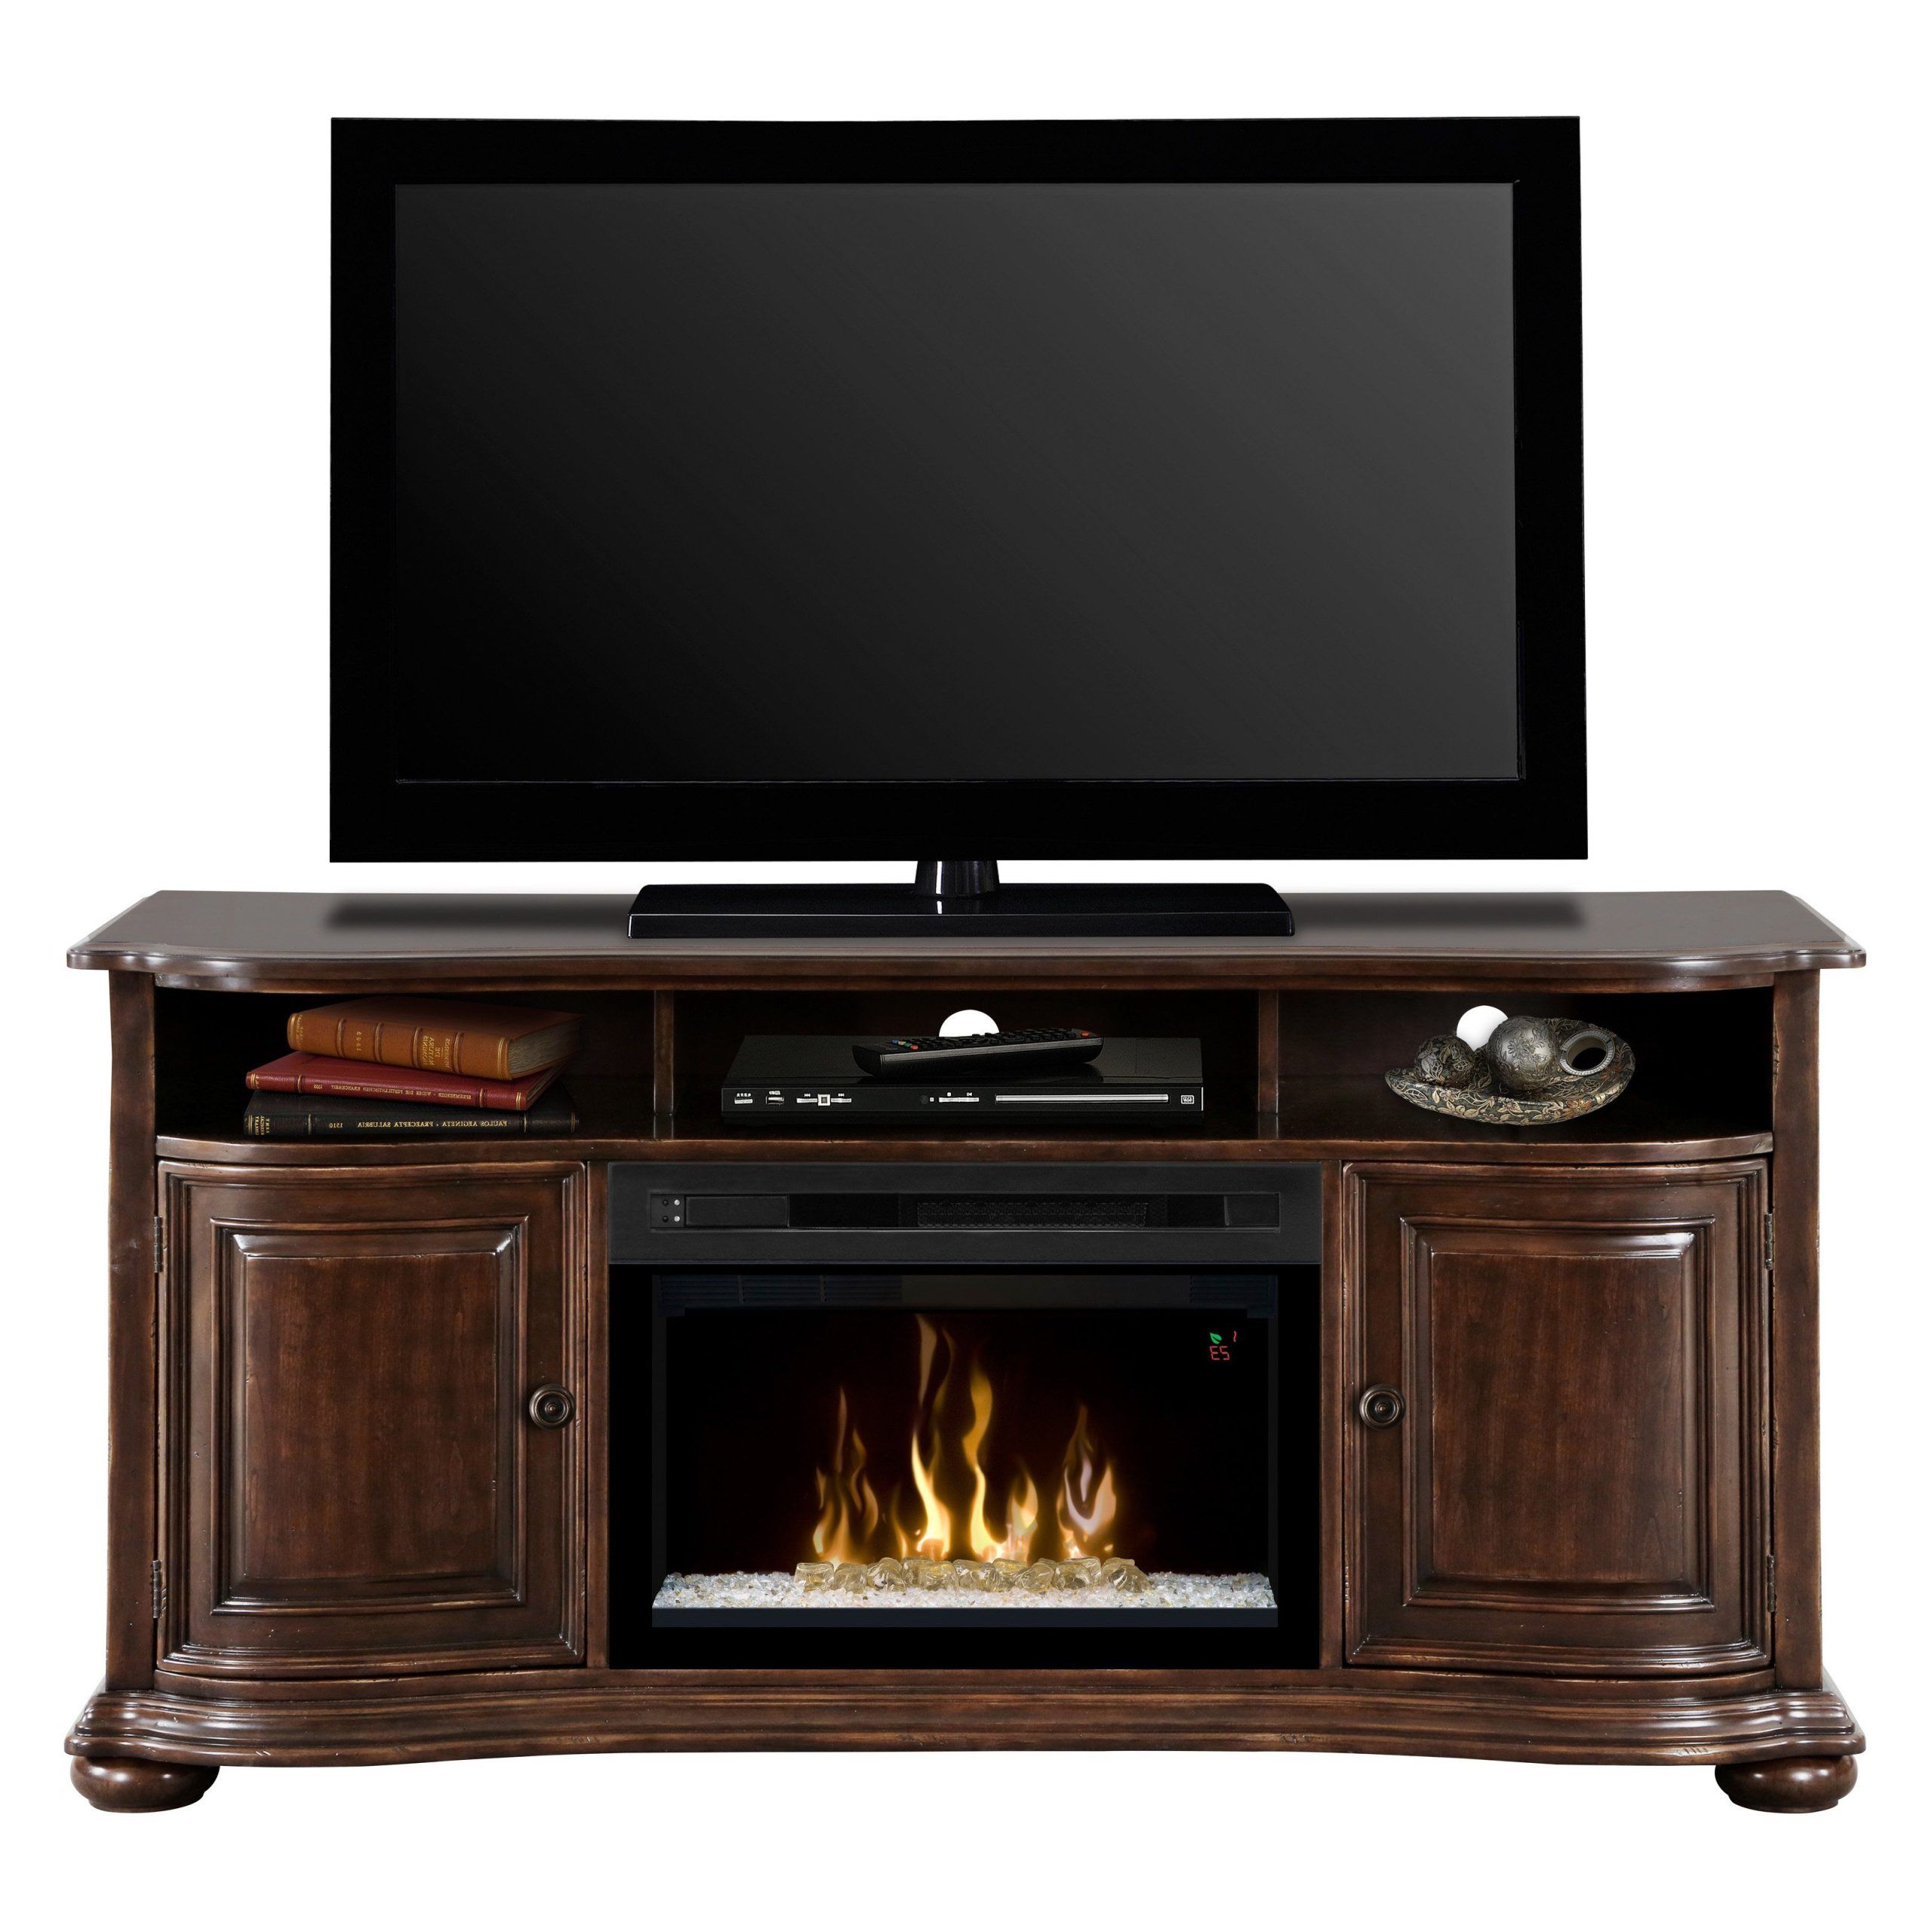 Dimplex Henderson Media Console With Electric Fireplace – Gds25l In Most Recently Released Electric Fireplace Entertainment Centers (View 14 of 15)